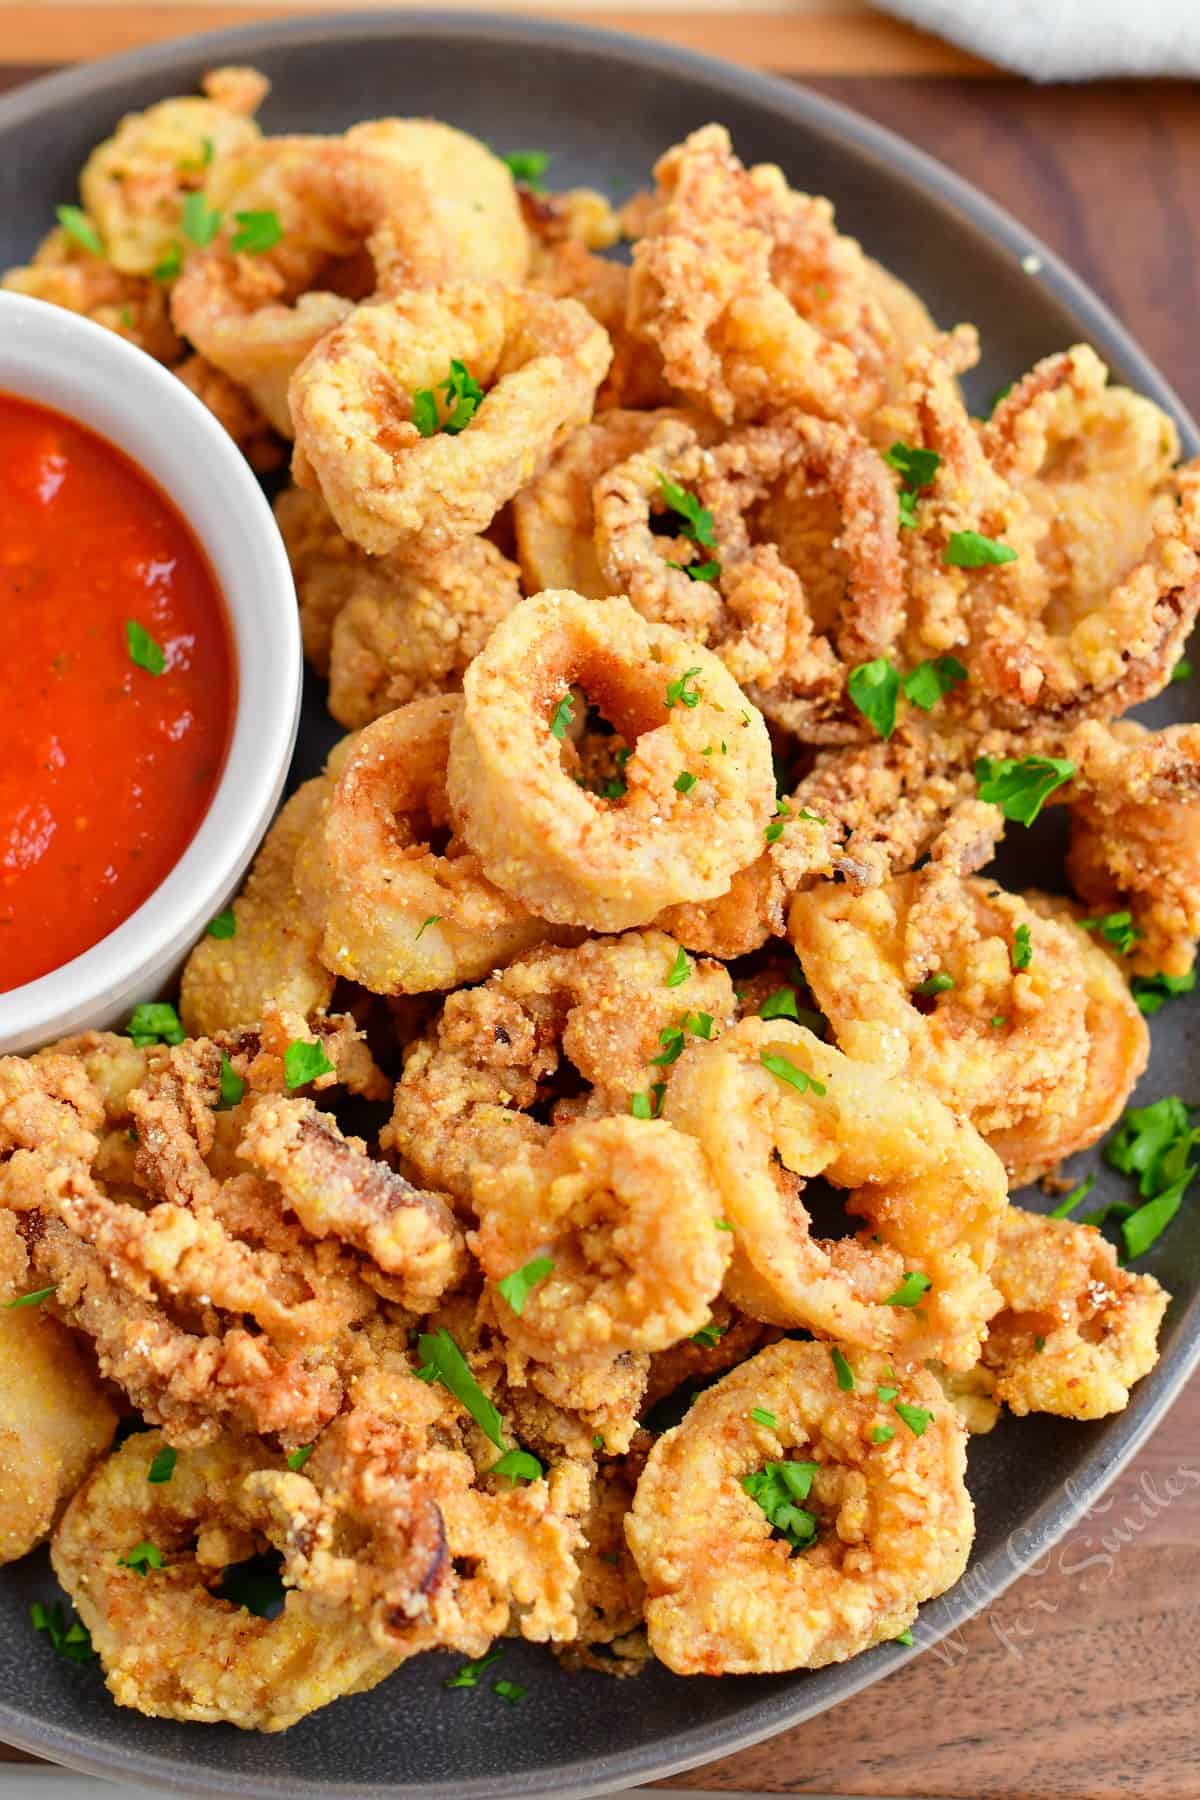 Calamari is plated with a small bowl of red dipping sauce.